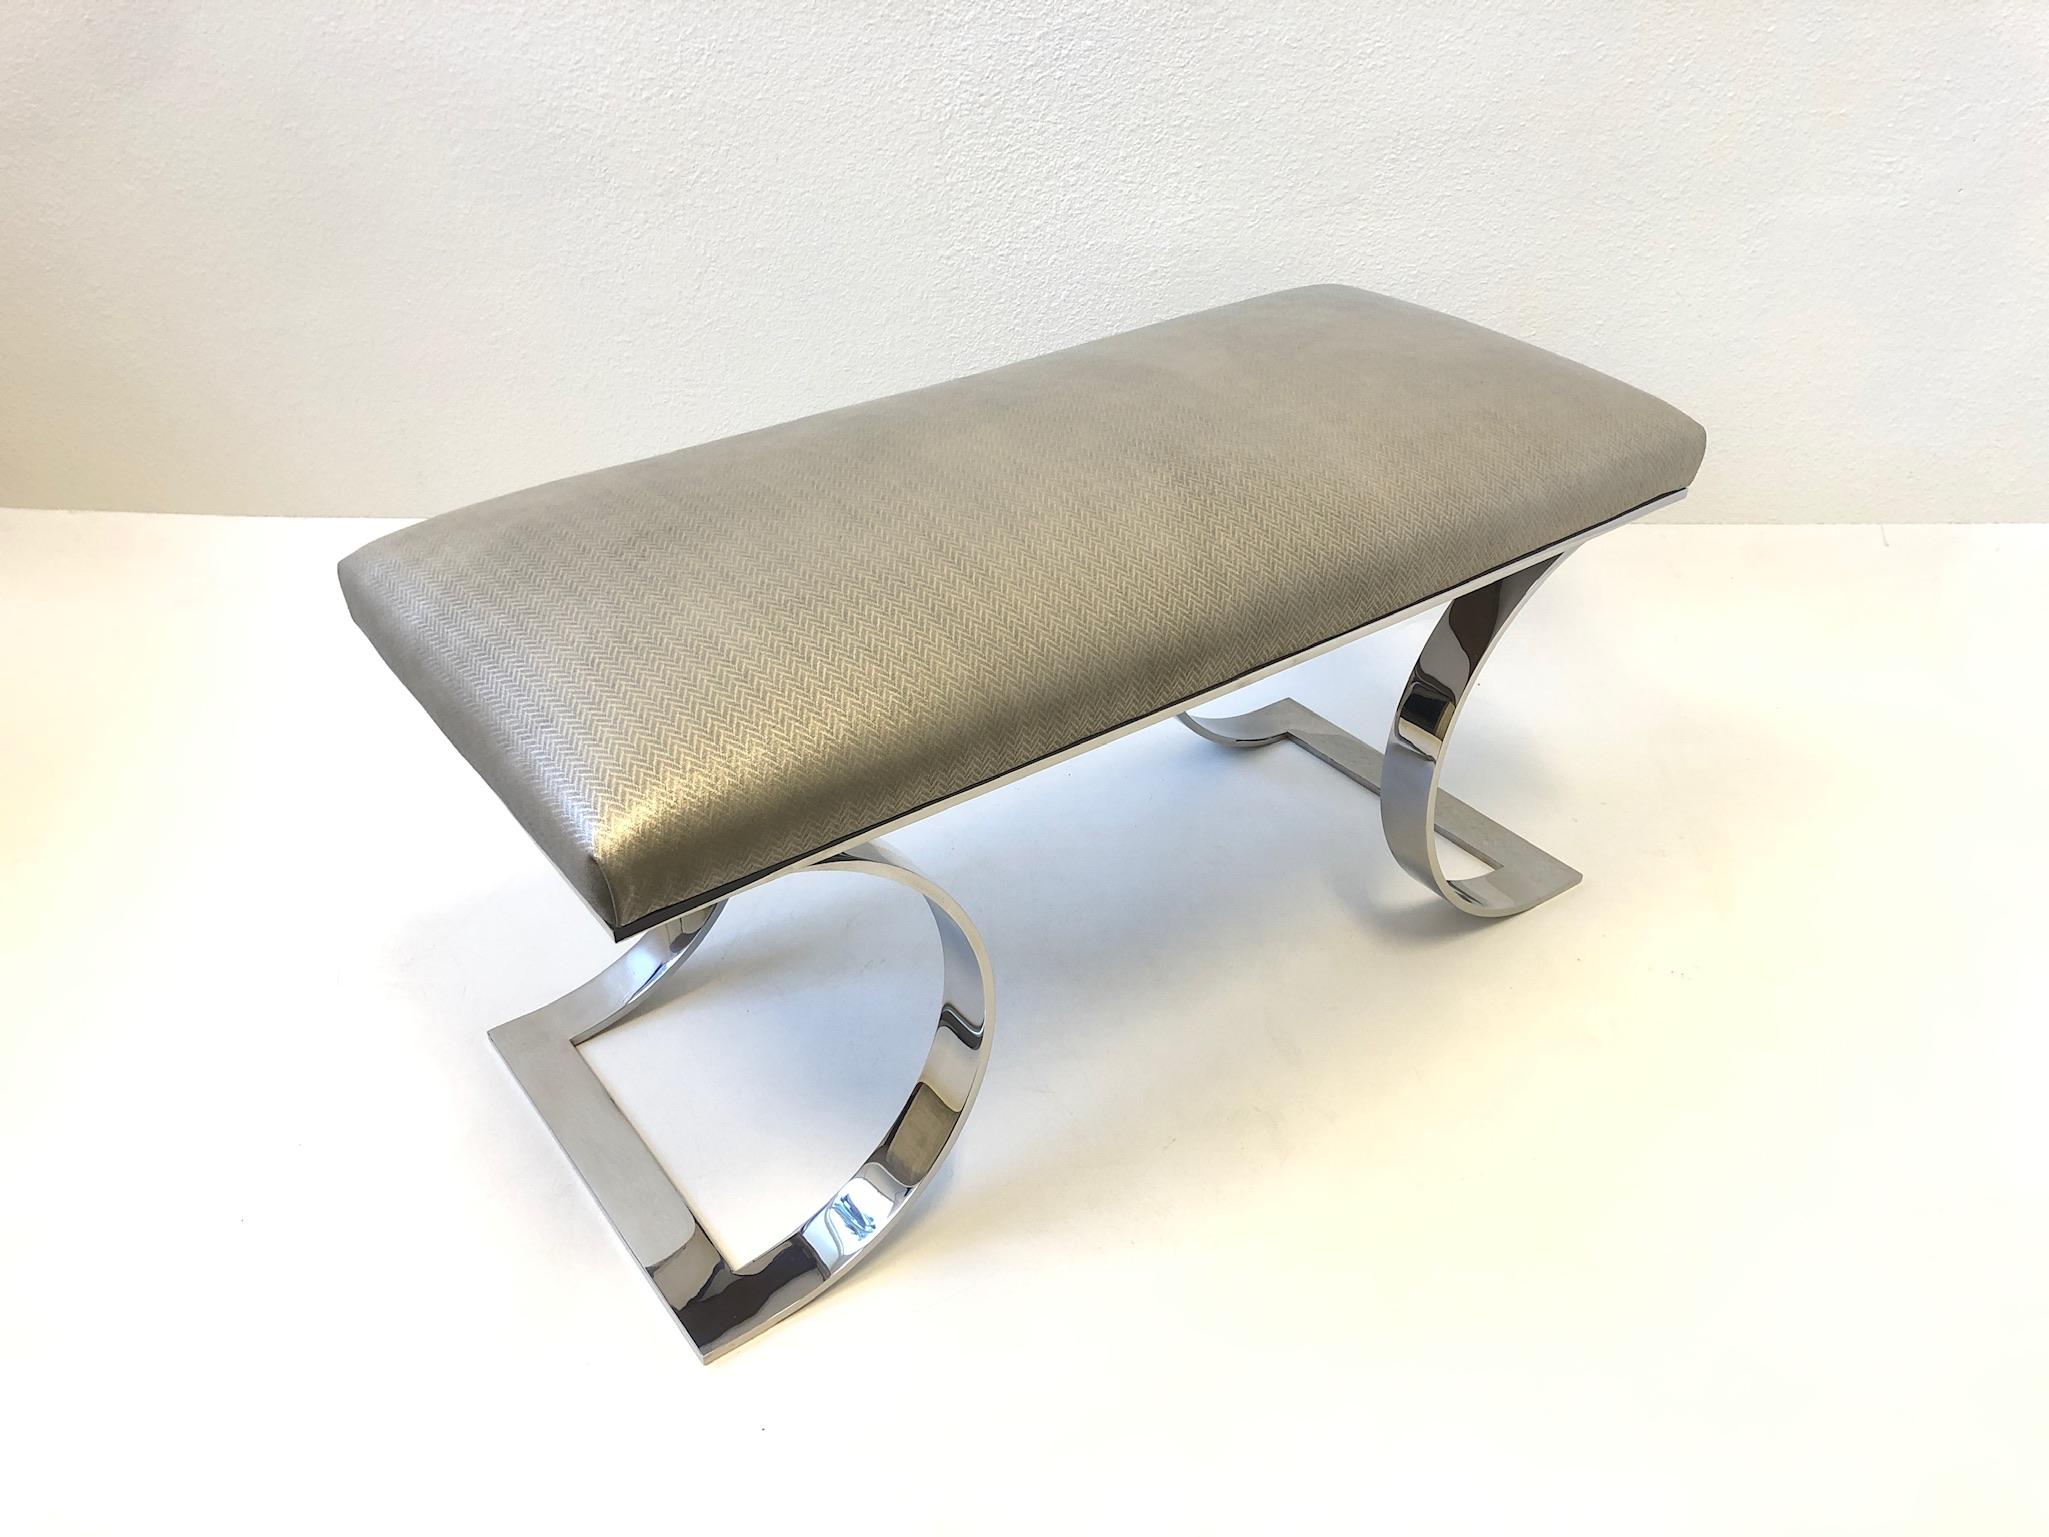 American Polish Stainless Steel and Leather “JMF Bench” by Karl Springer